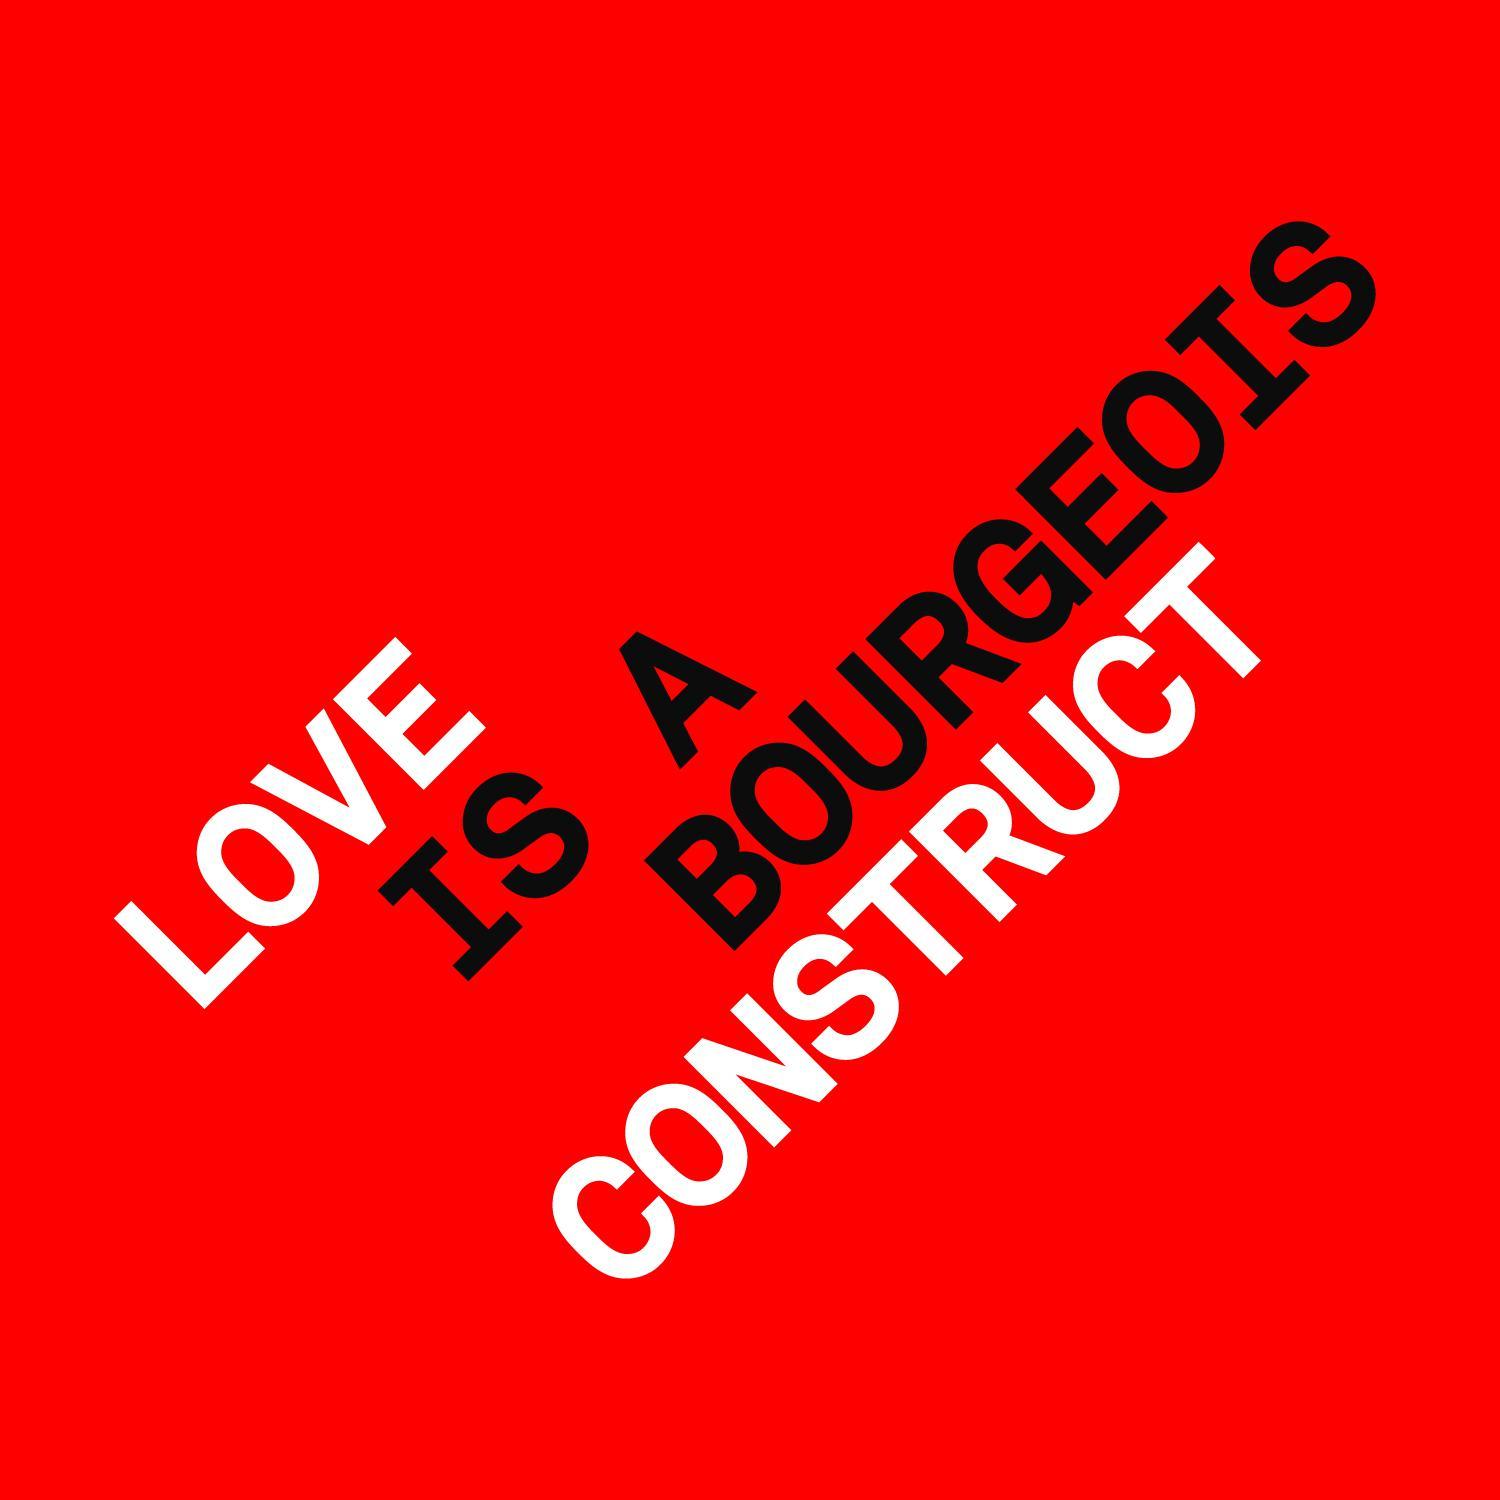 Love is a Bourgeois Construct Little Boots Discothe que Edit